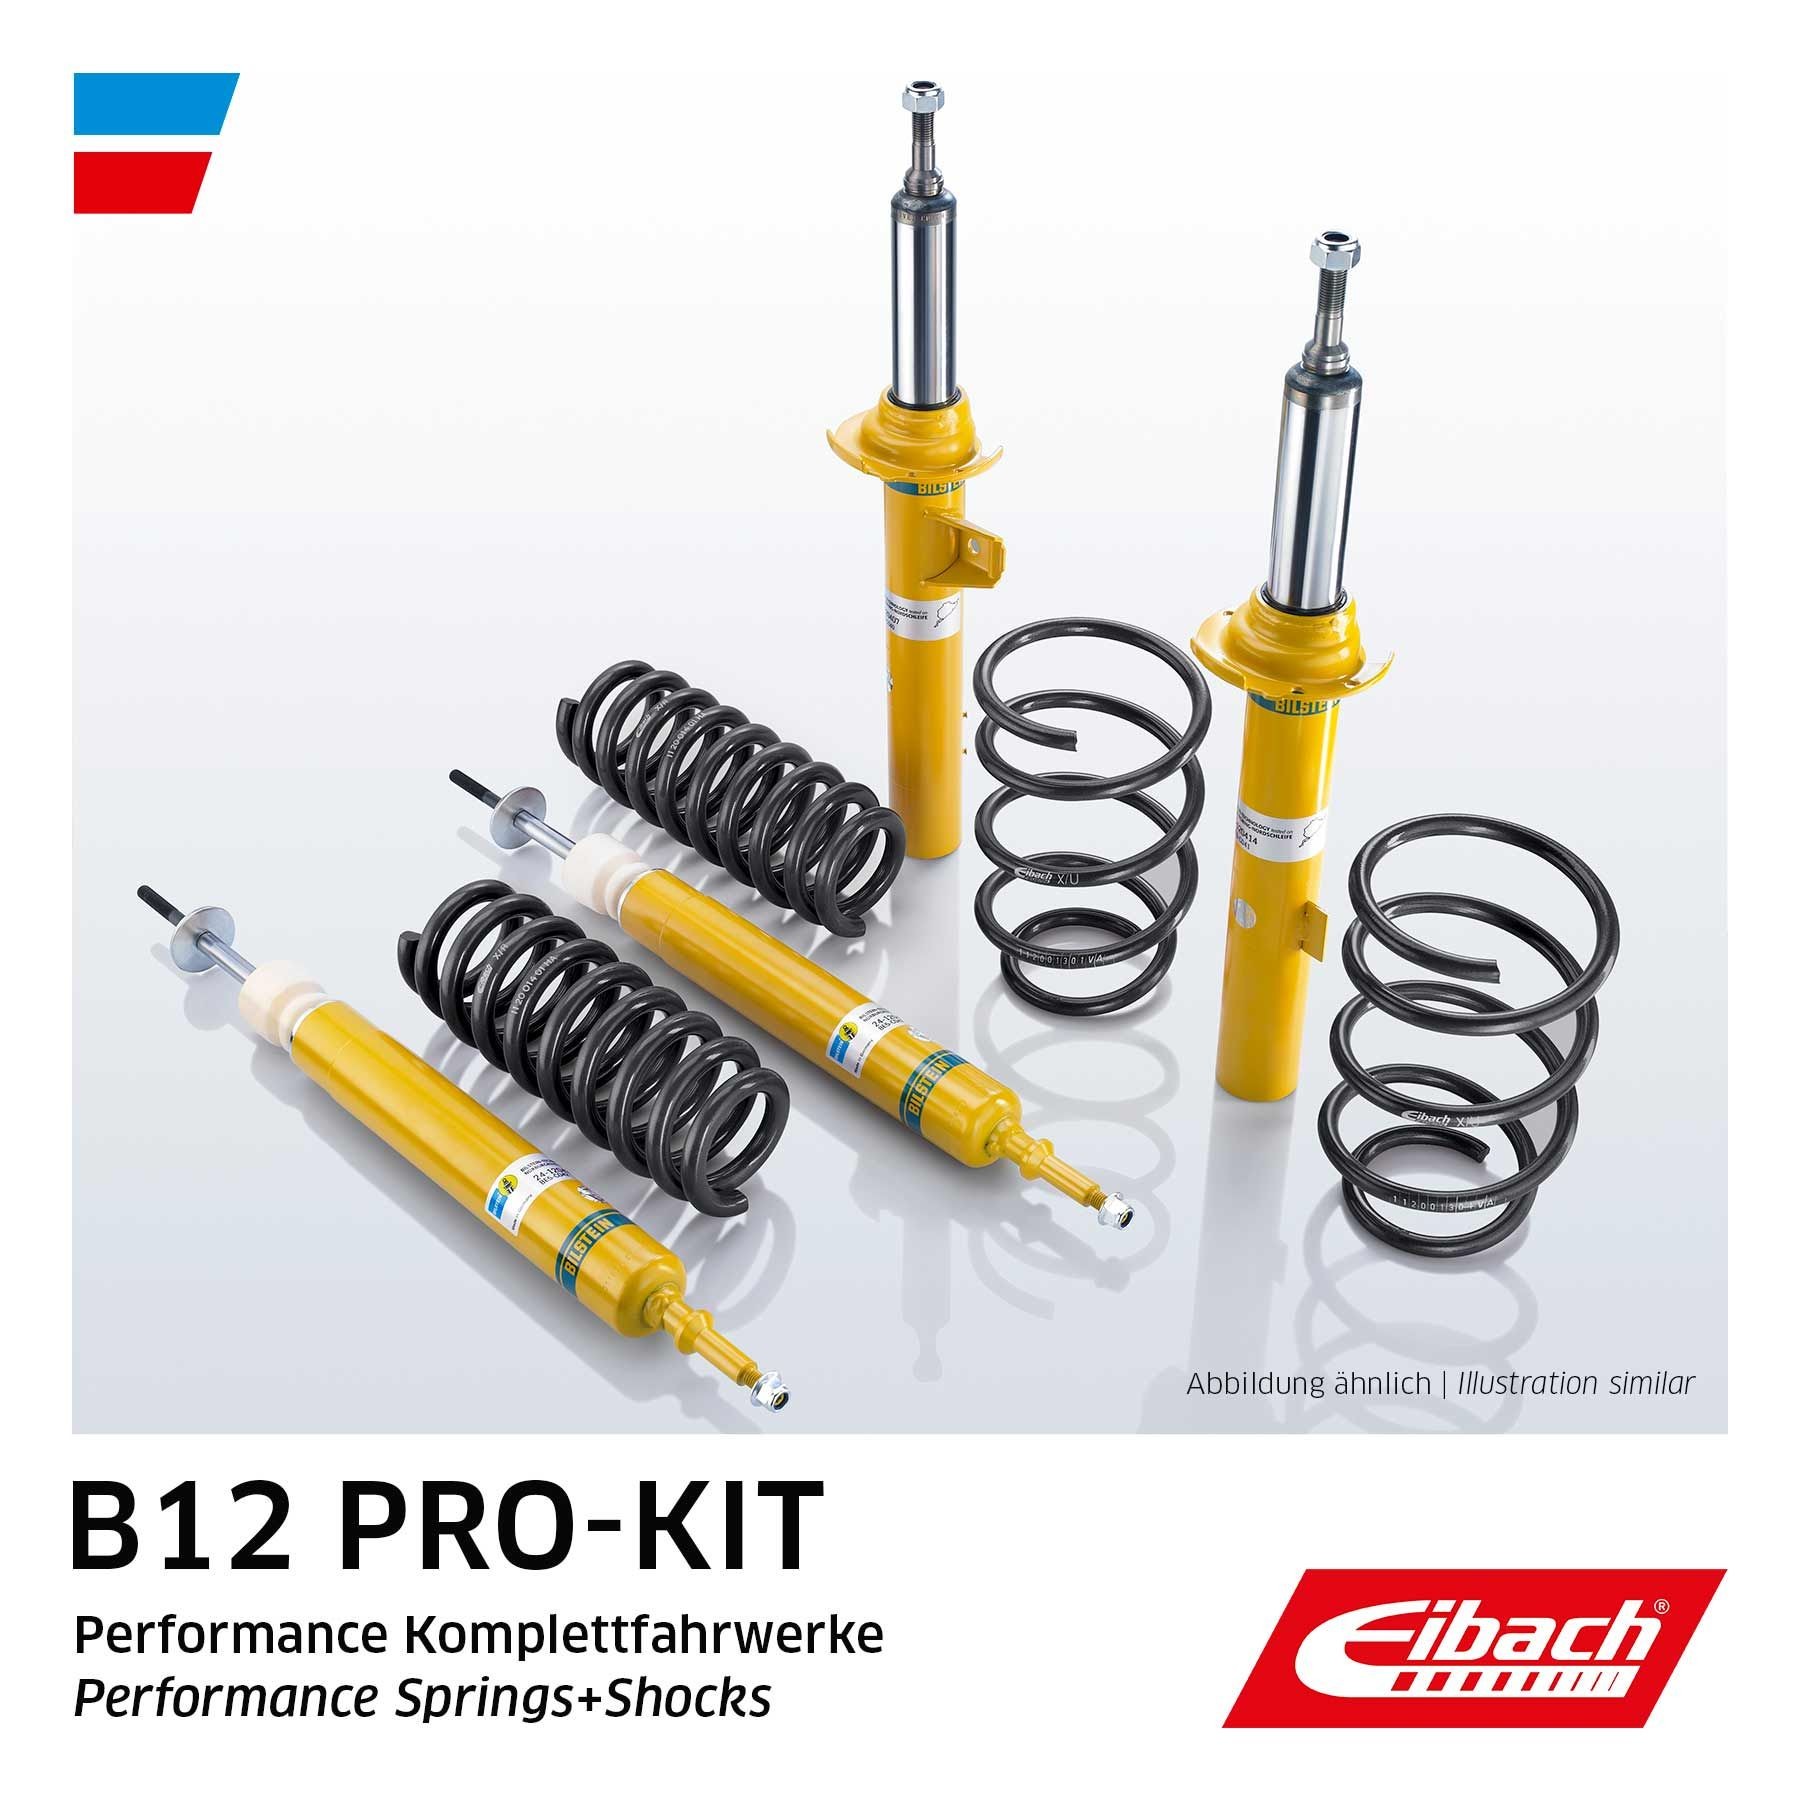 EIBACH Suspension kit, coil springs / shock absorbers Polo 6n1 new E90-15-021-16-22